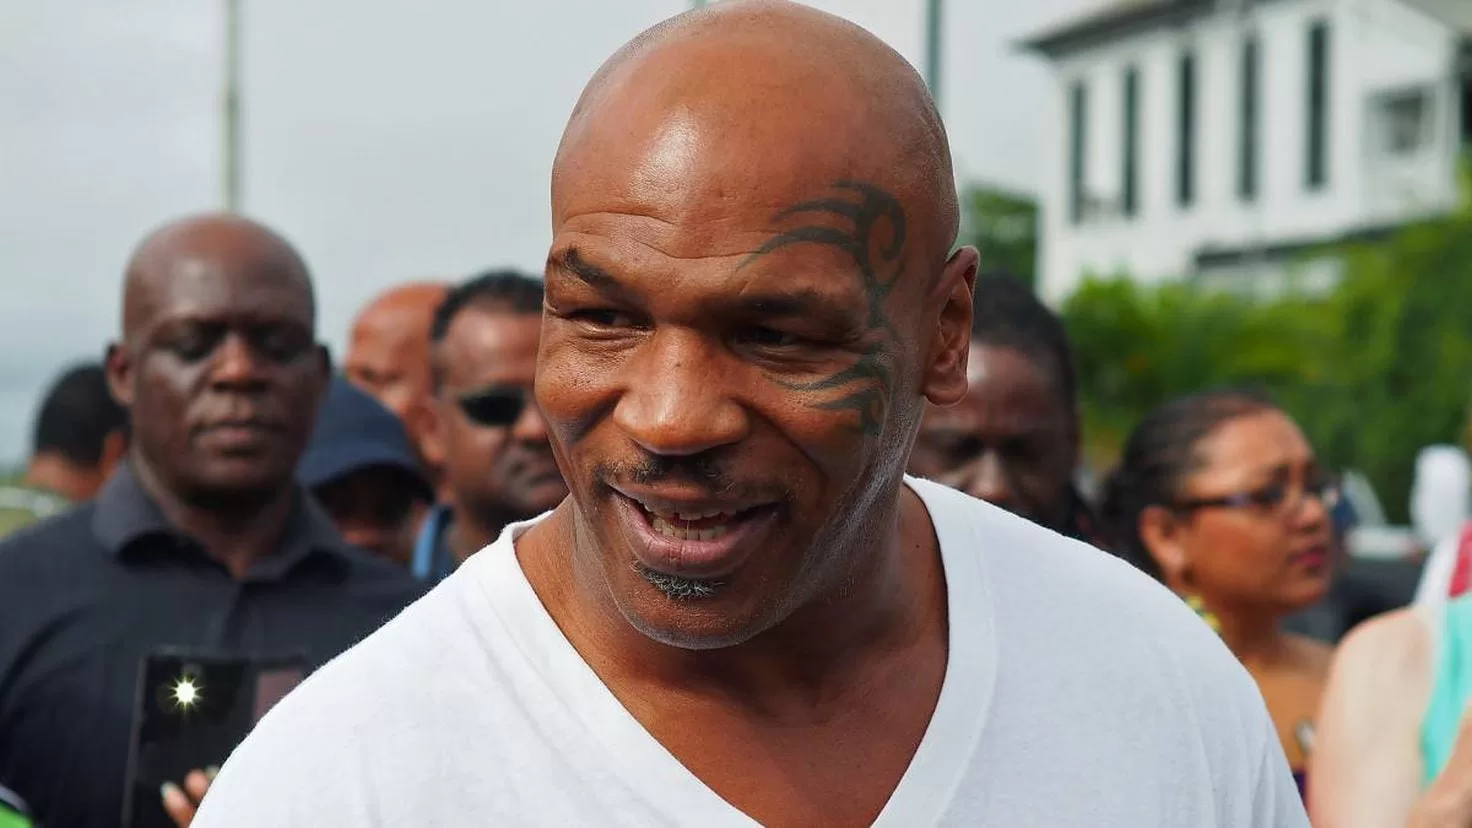 They ask Mike Tyson for half a million dollars to avoid going to trial after attacking a passenger on a flight
